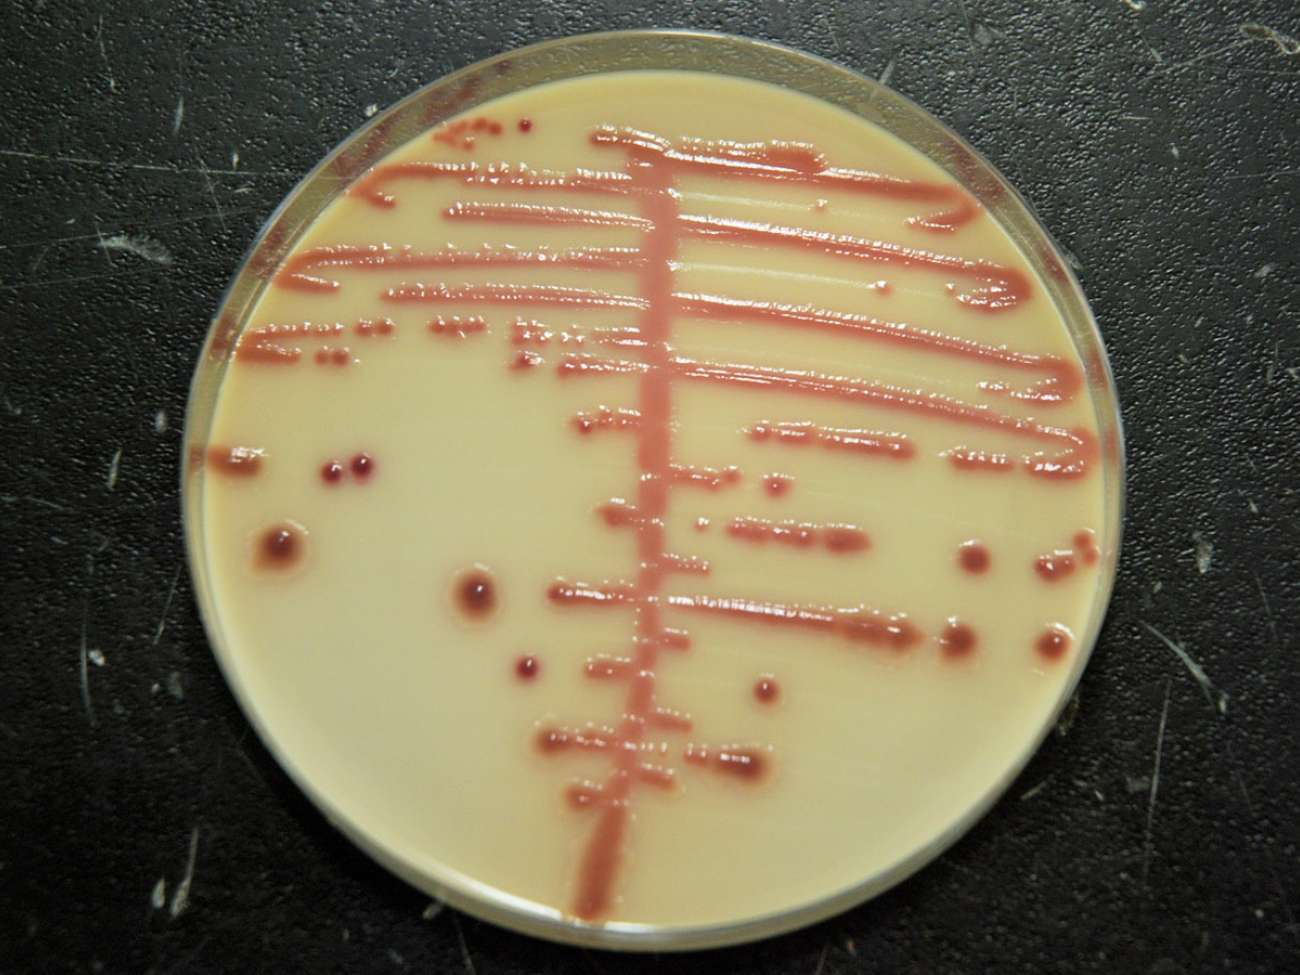 Manual streaking of plates to grow pathogens took time, was less consistent, and could streak less of the plate.